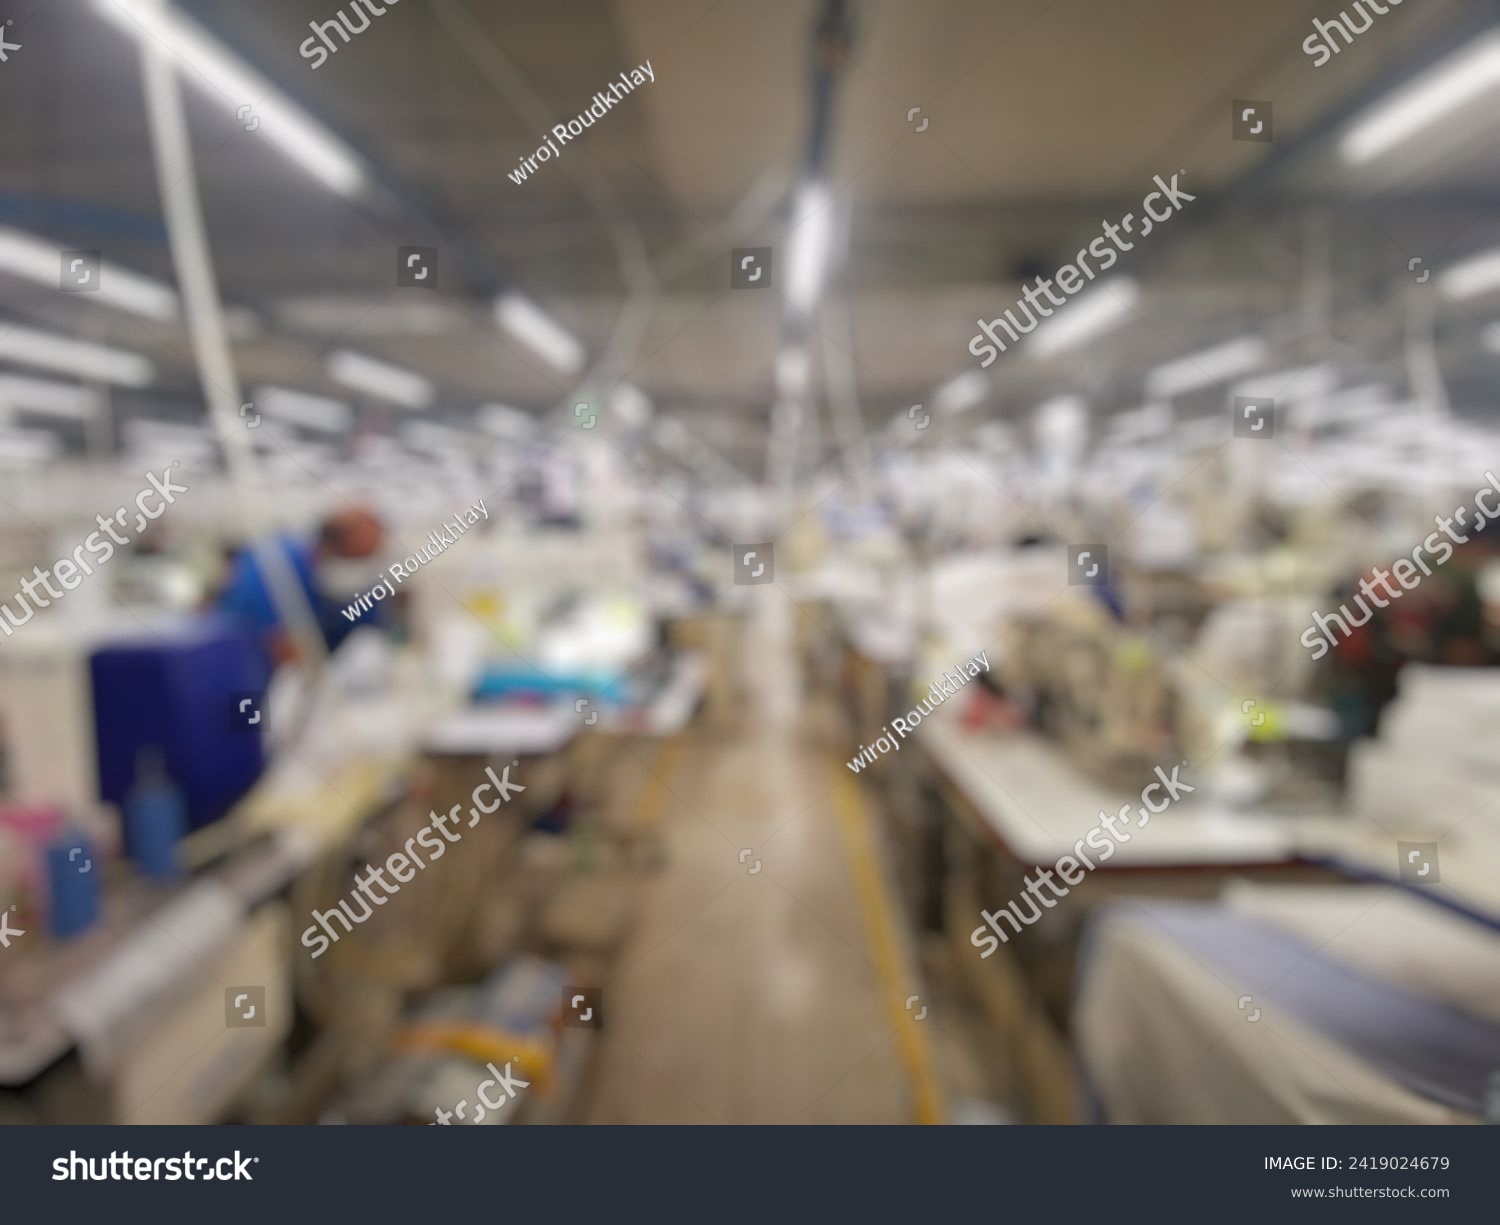 Blurred image of Employees are sewing shirts in​ the​ garment​ factory​ Thailand.​Background blur. #2419024679